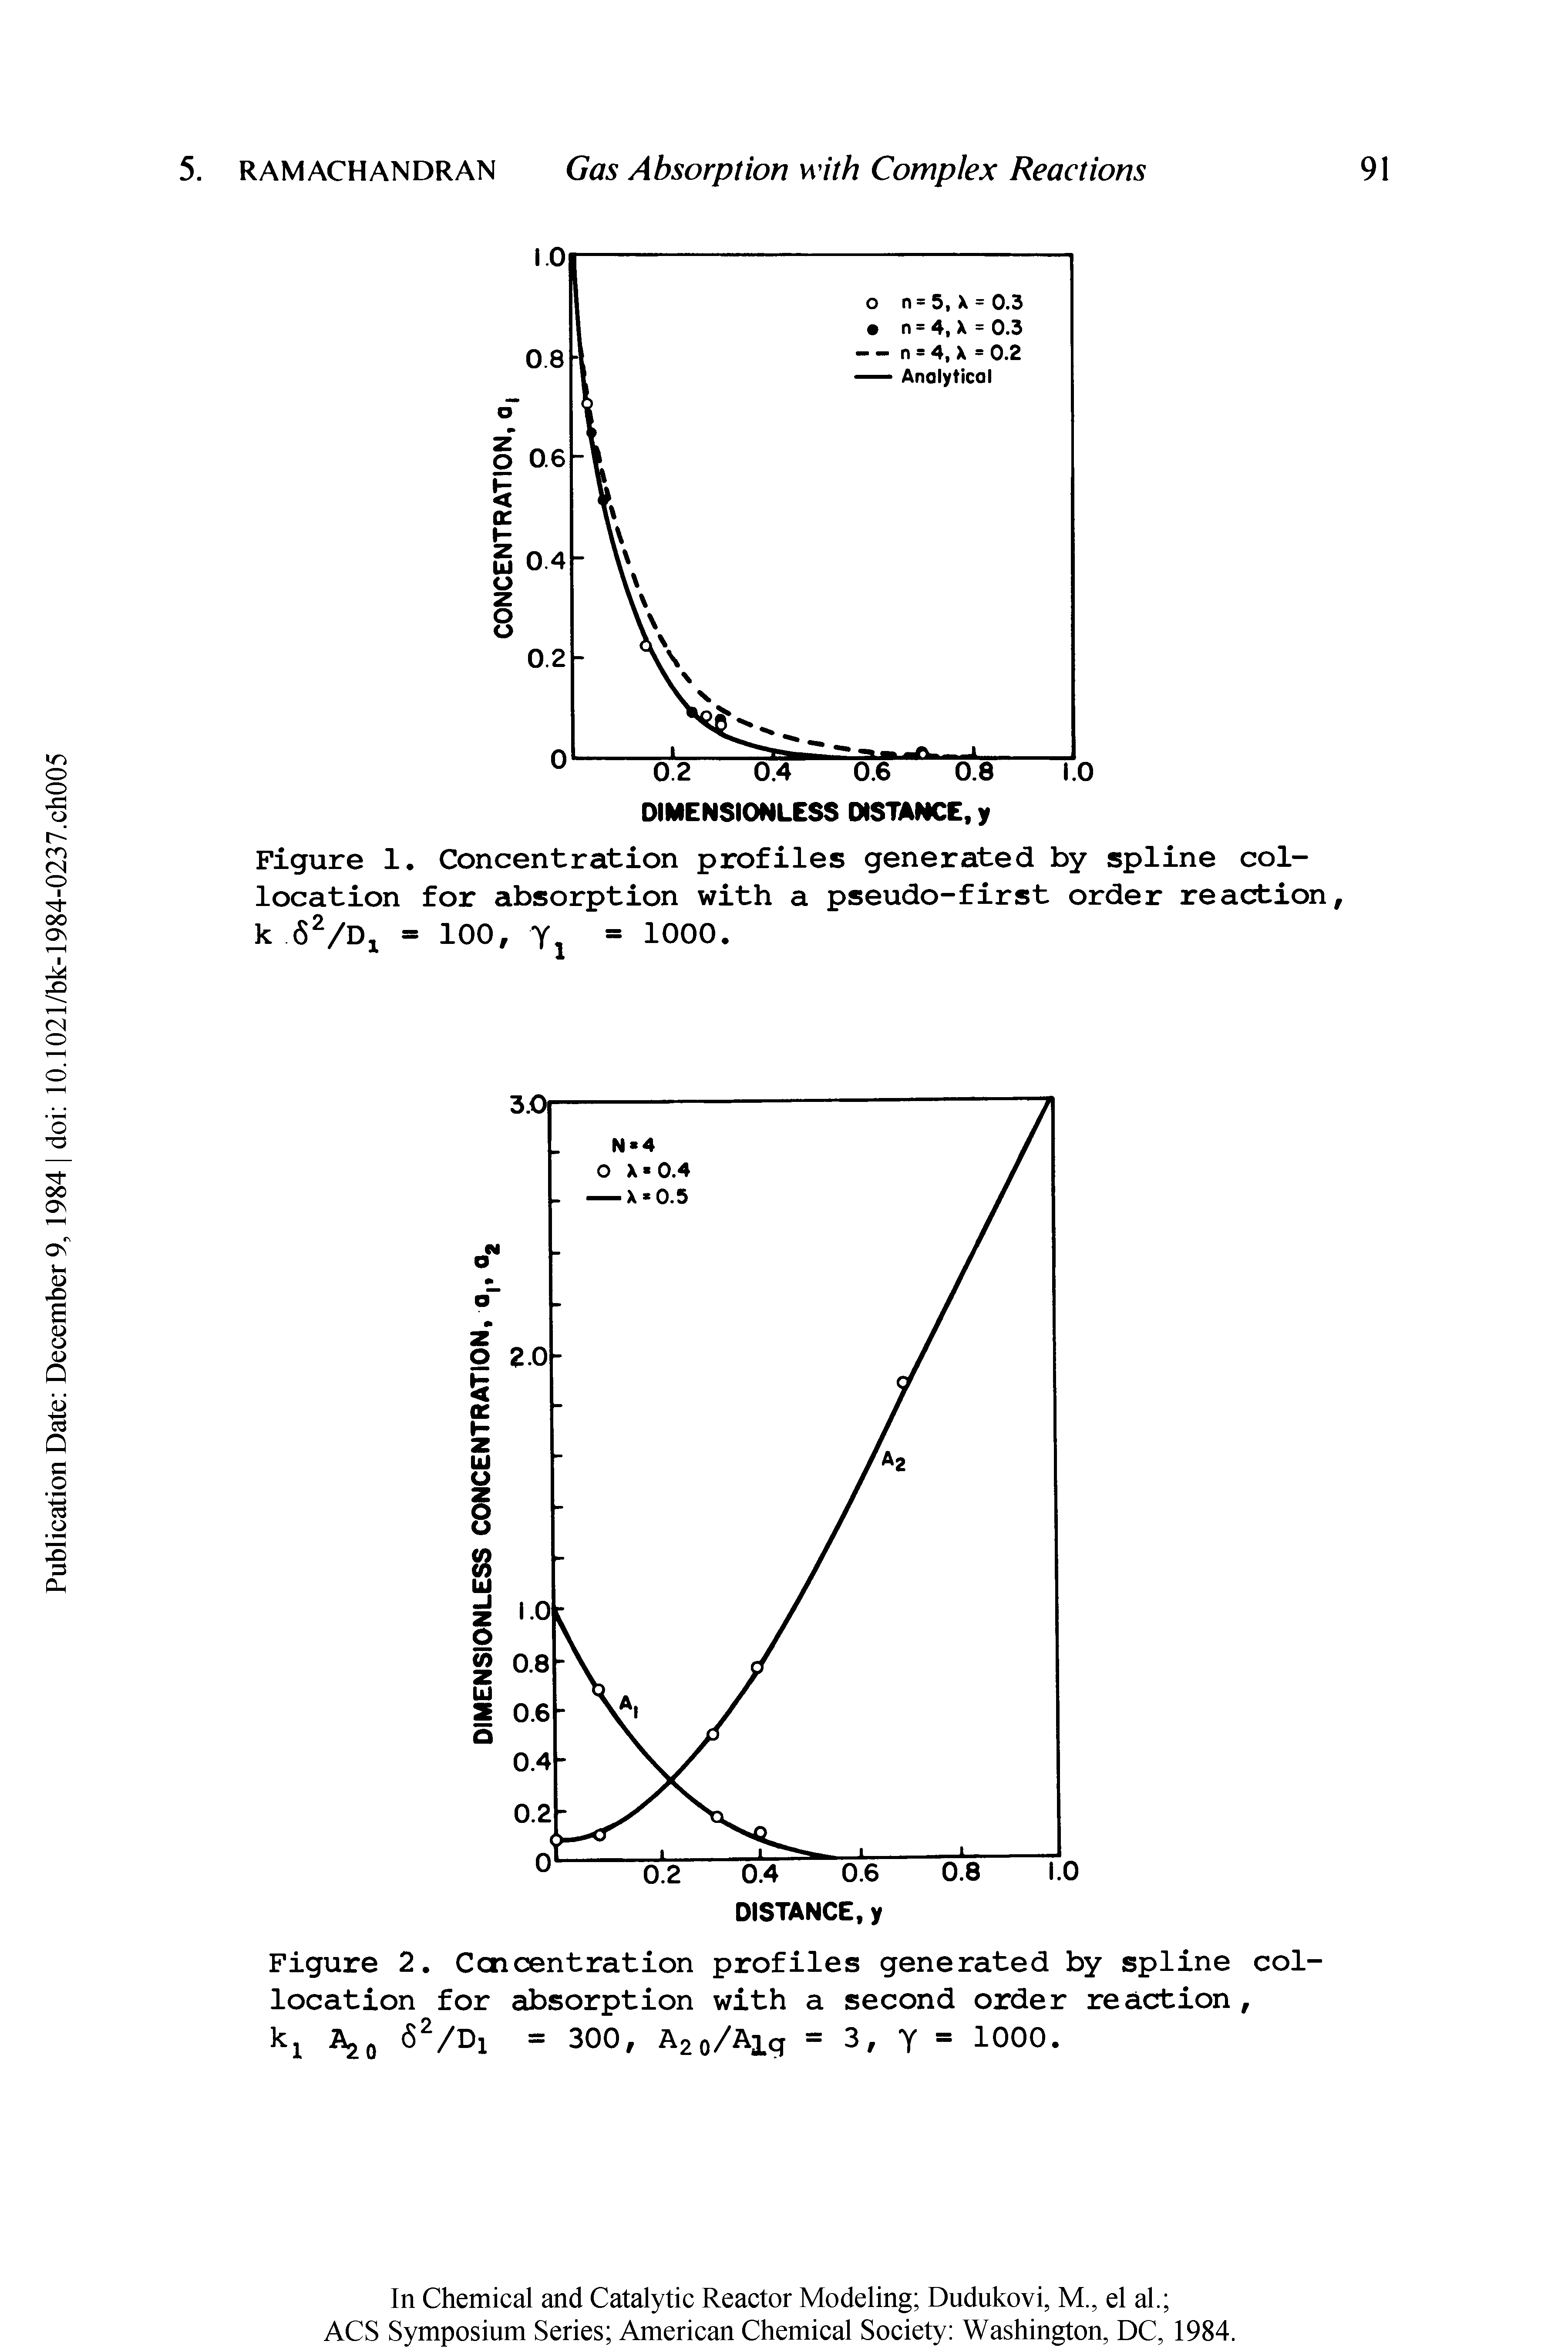 Figure 1. Concentration profiles generated by spline collocation for absorption with a pseudo-first order reaction, k 2/D1 = 100, Yj = 1000.